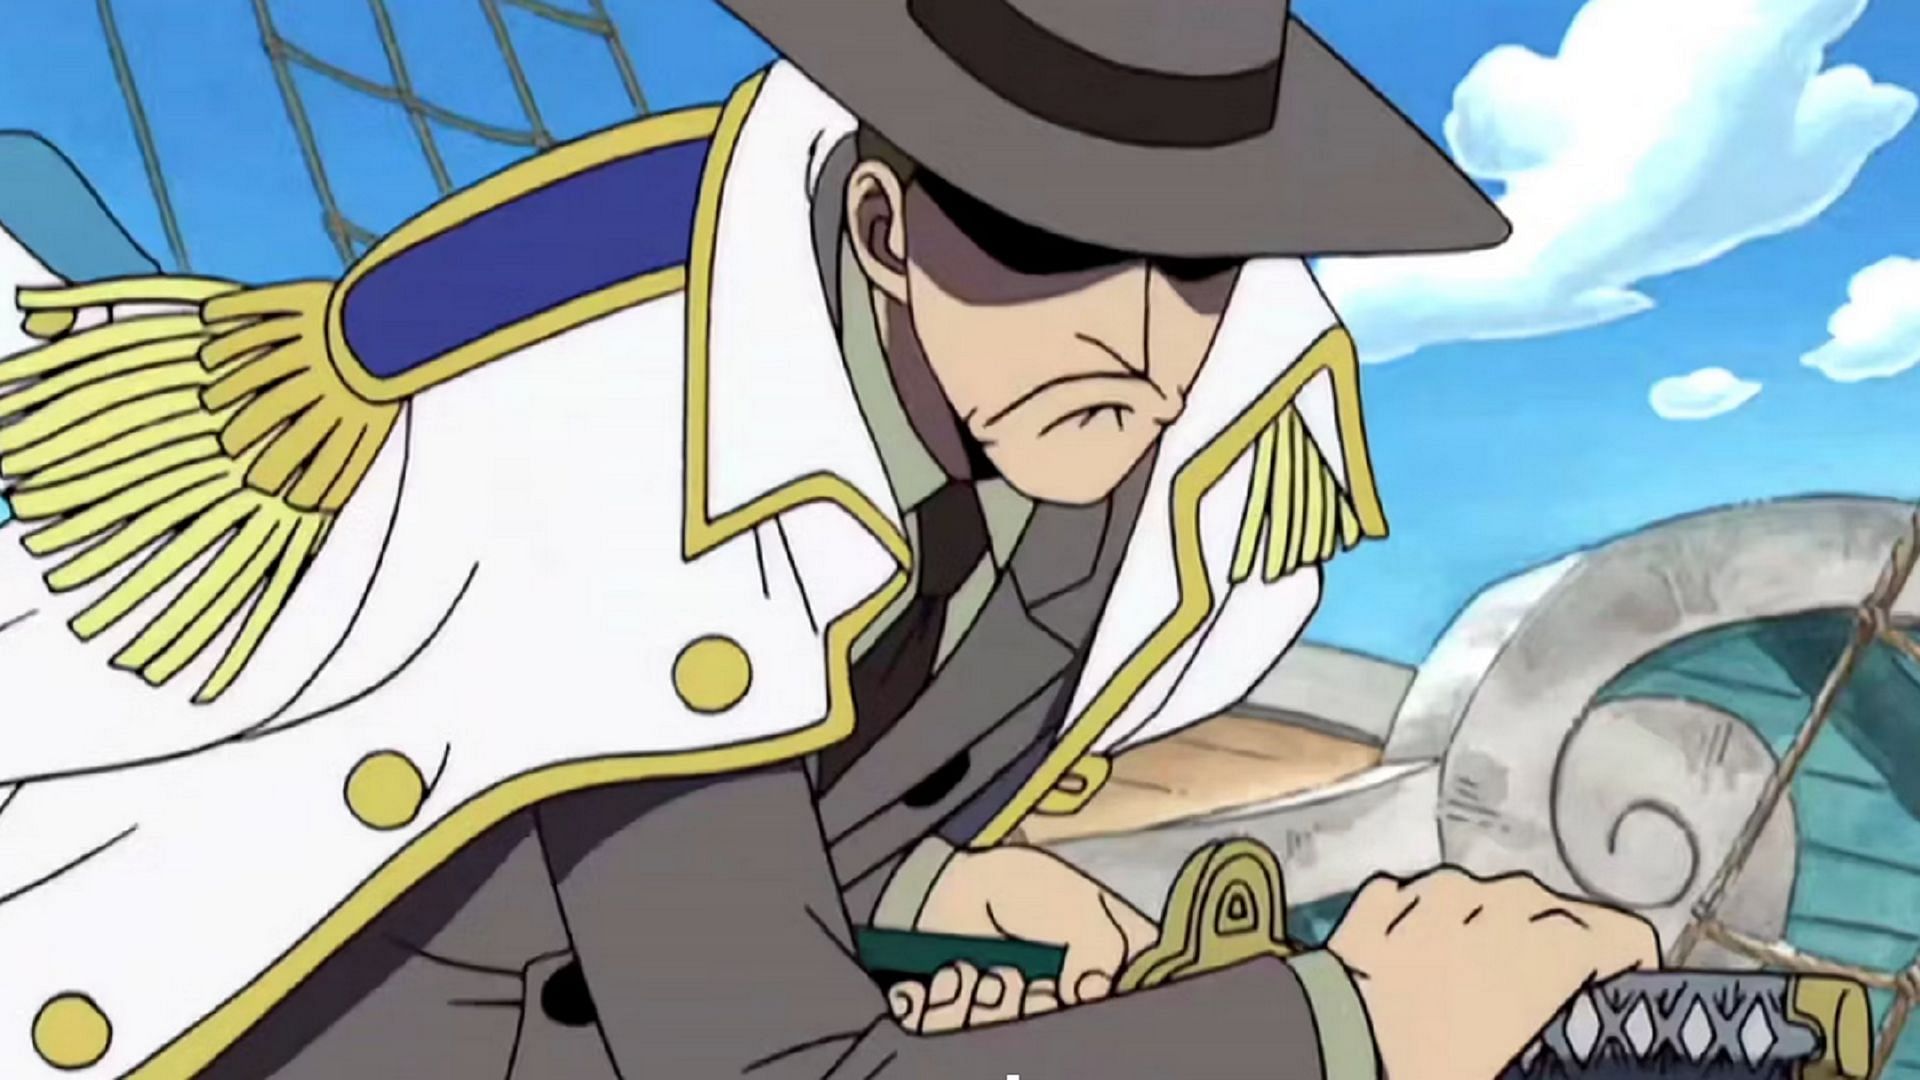 Bogard as seen in One Piece (Image via Toei Animation, One Piece)